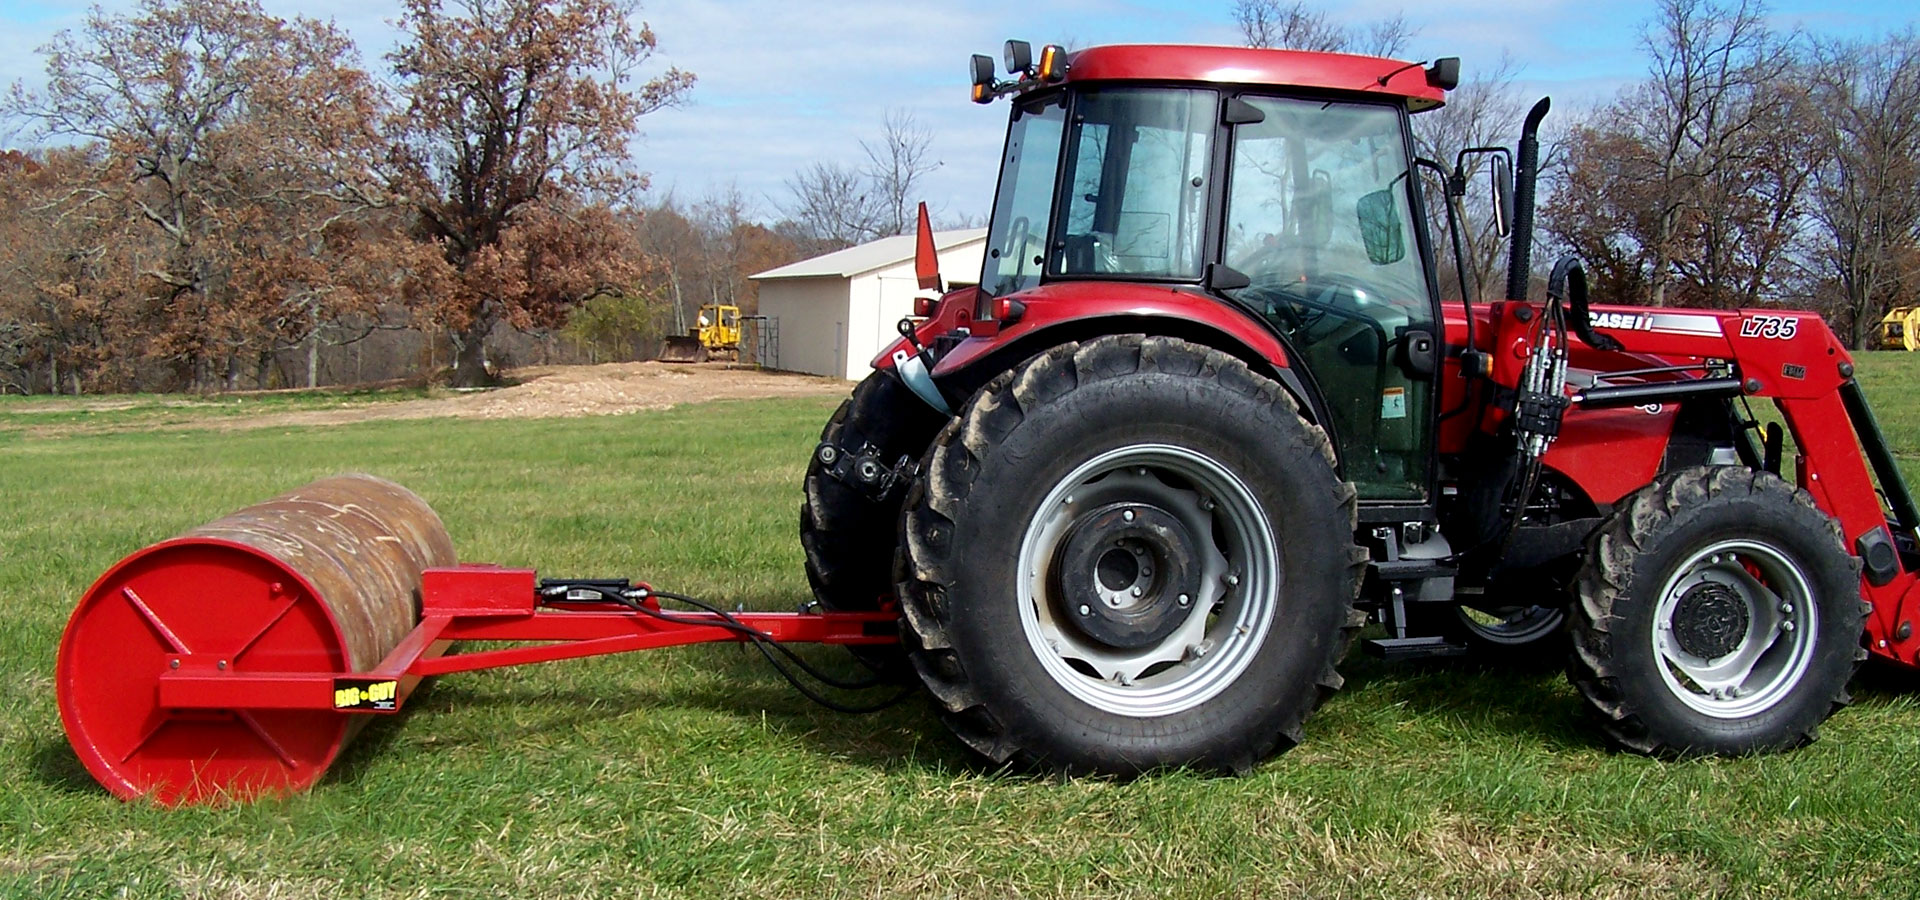 Field rollers, lawn rollers, land levelers